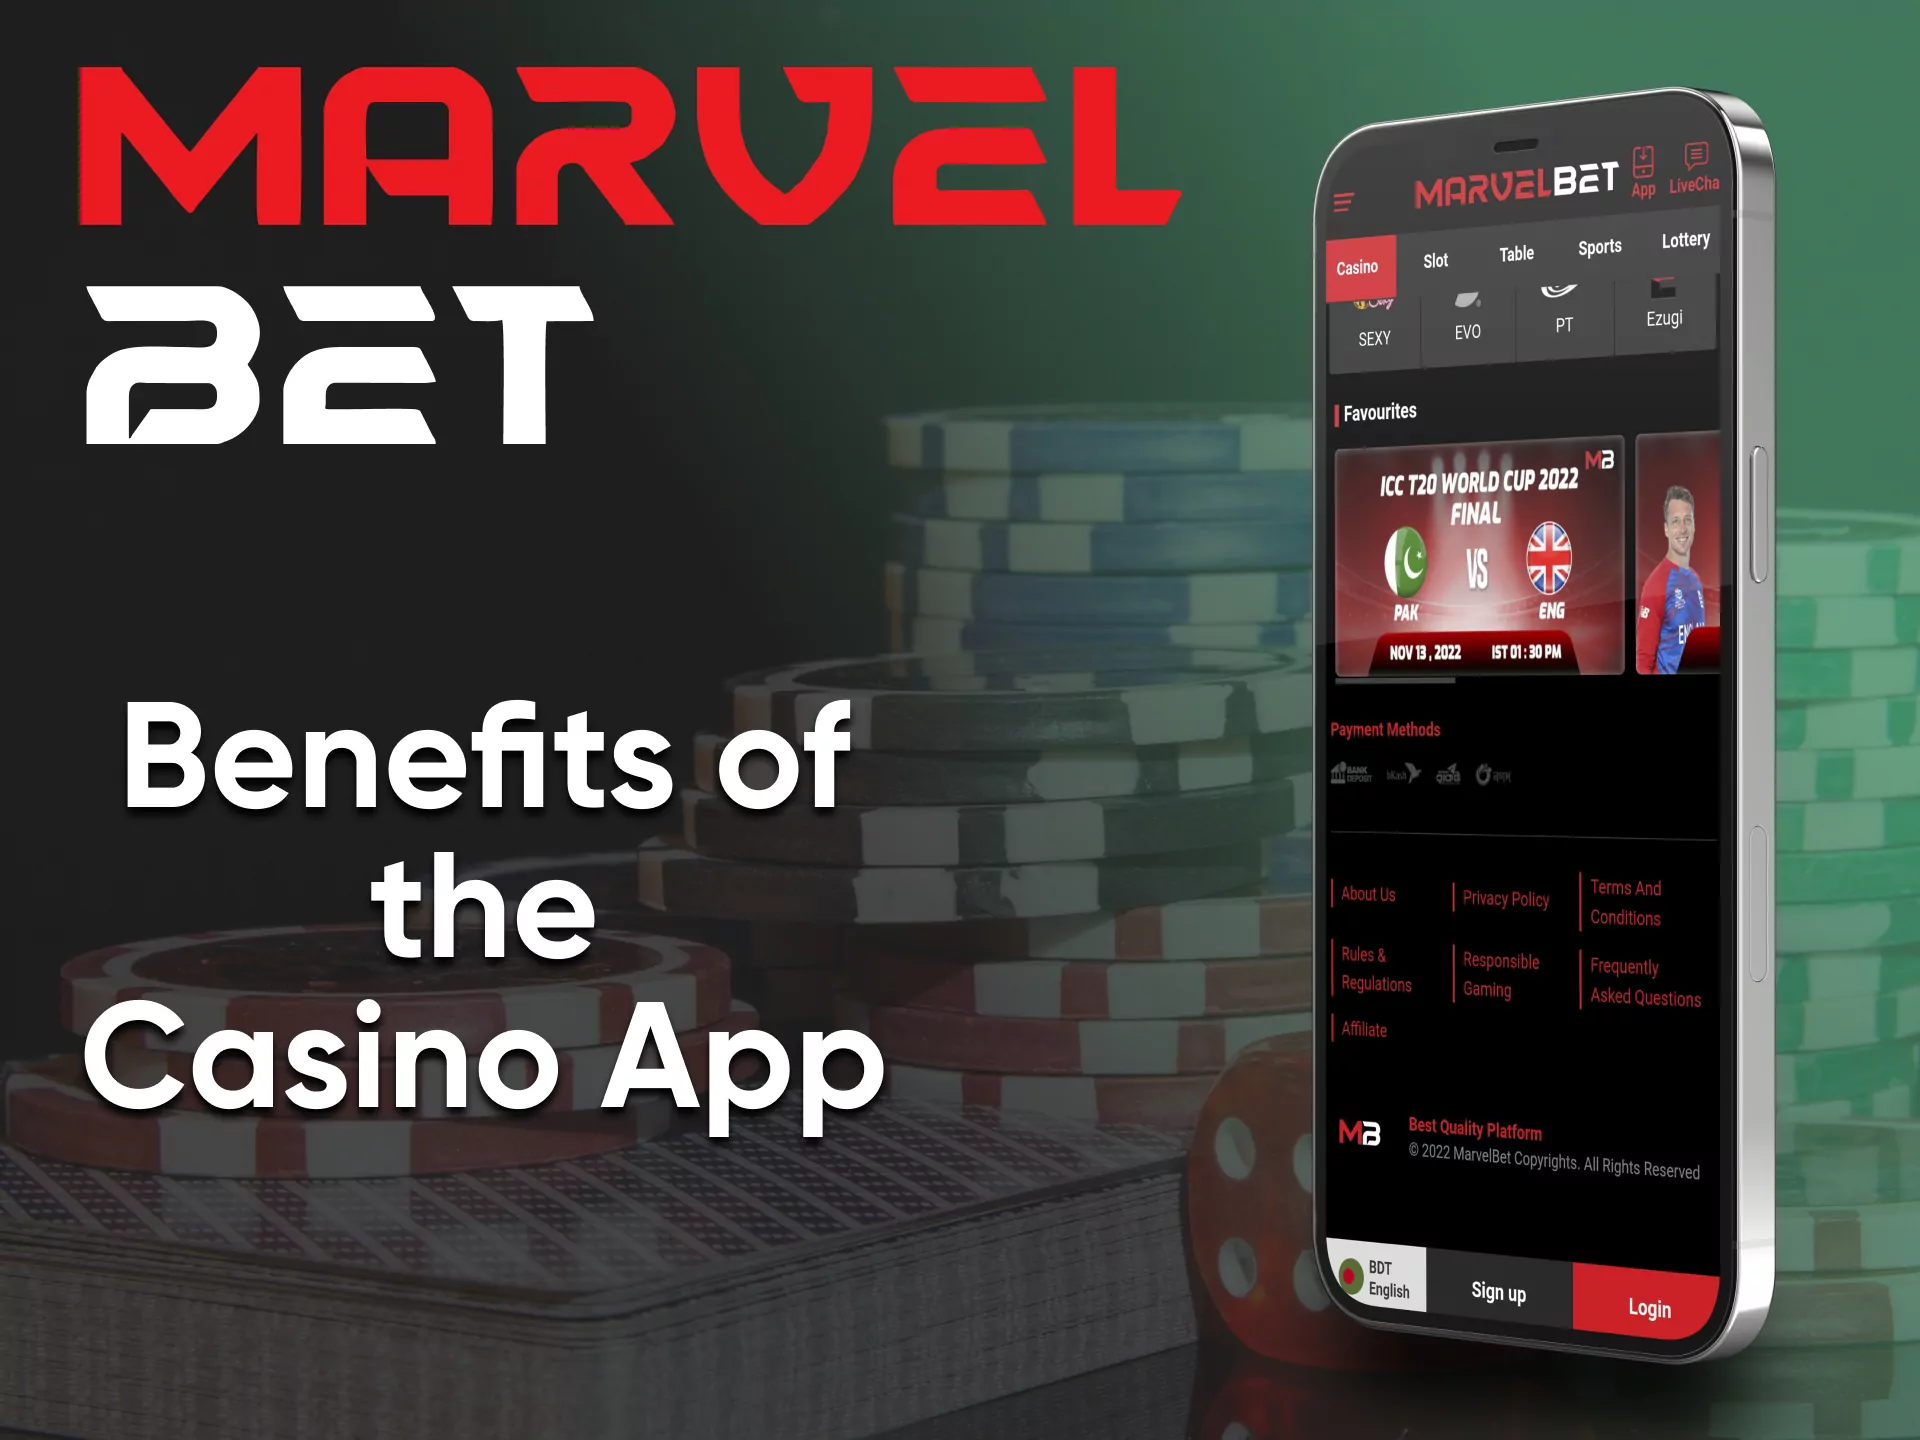 Choose the best casino gaming app from Marvelbet.